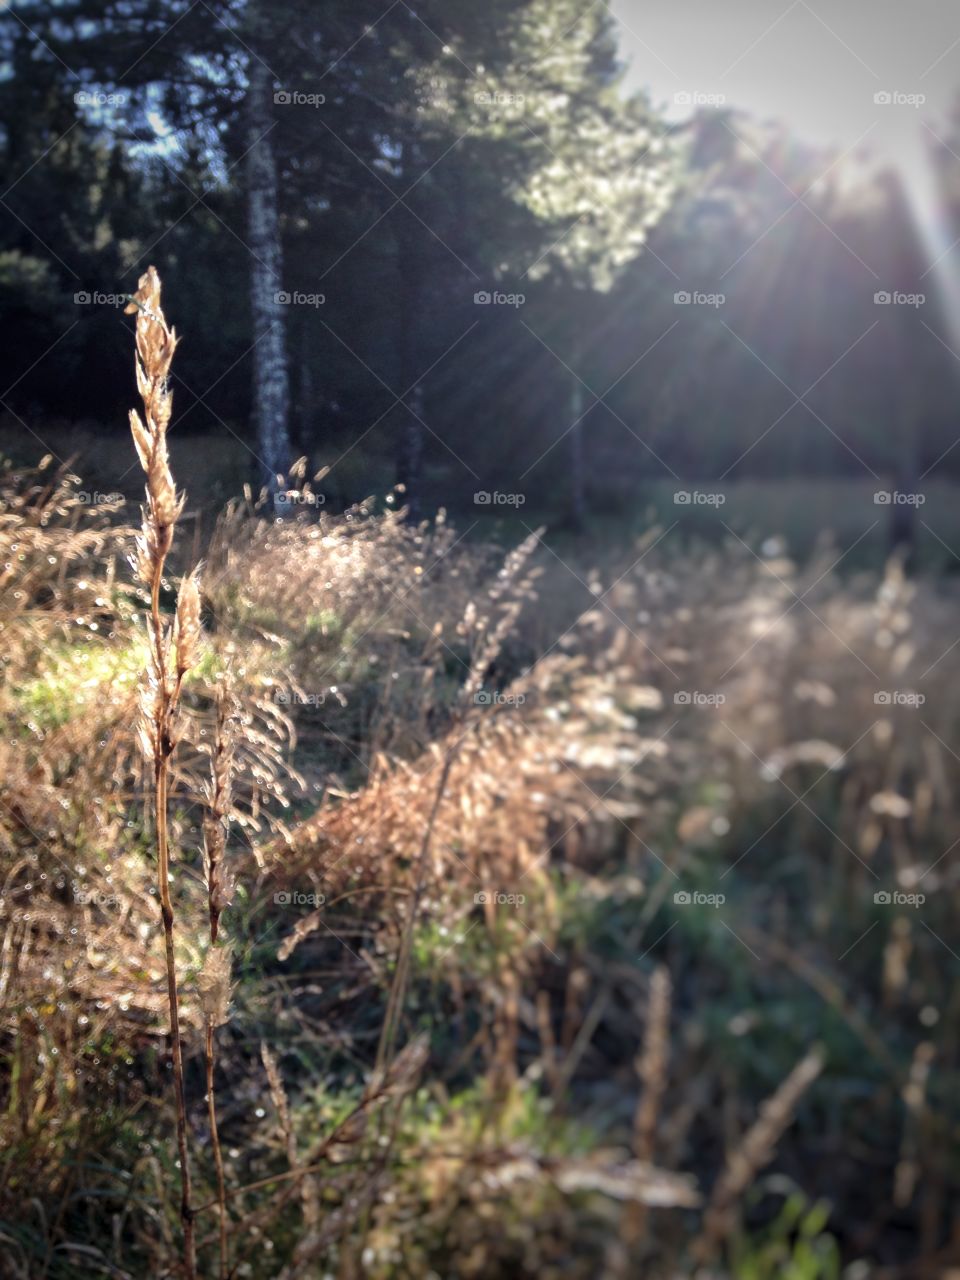 In the early morning, the sun hits the tall grass in my field and it's my favorite sight. This is my point of view. 